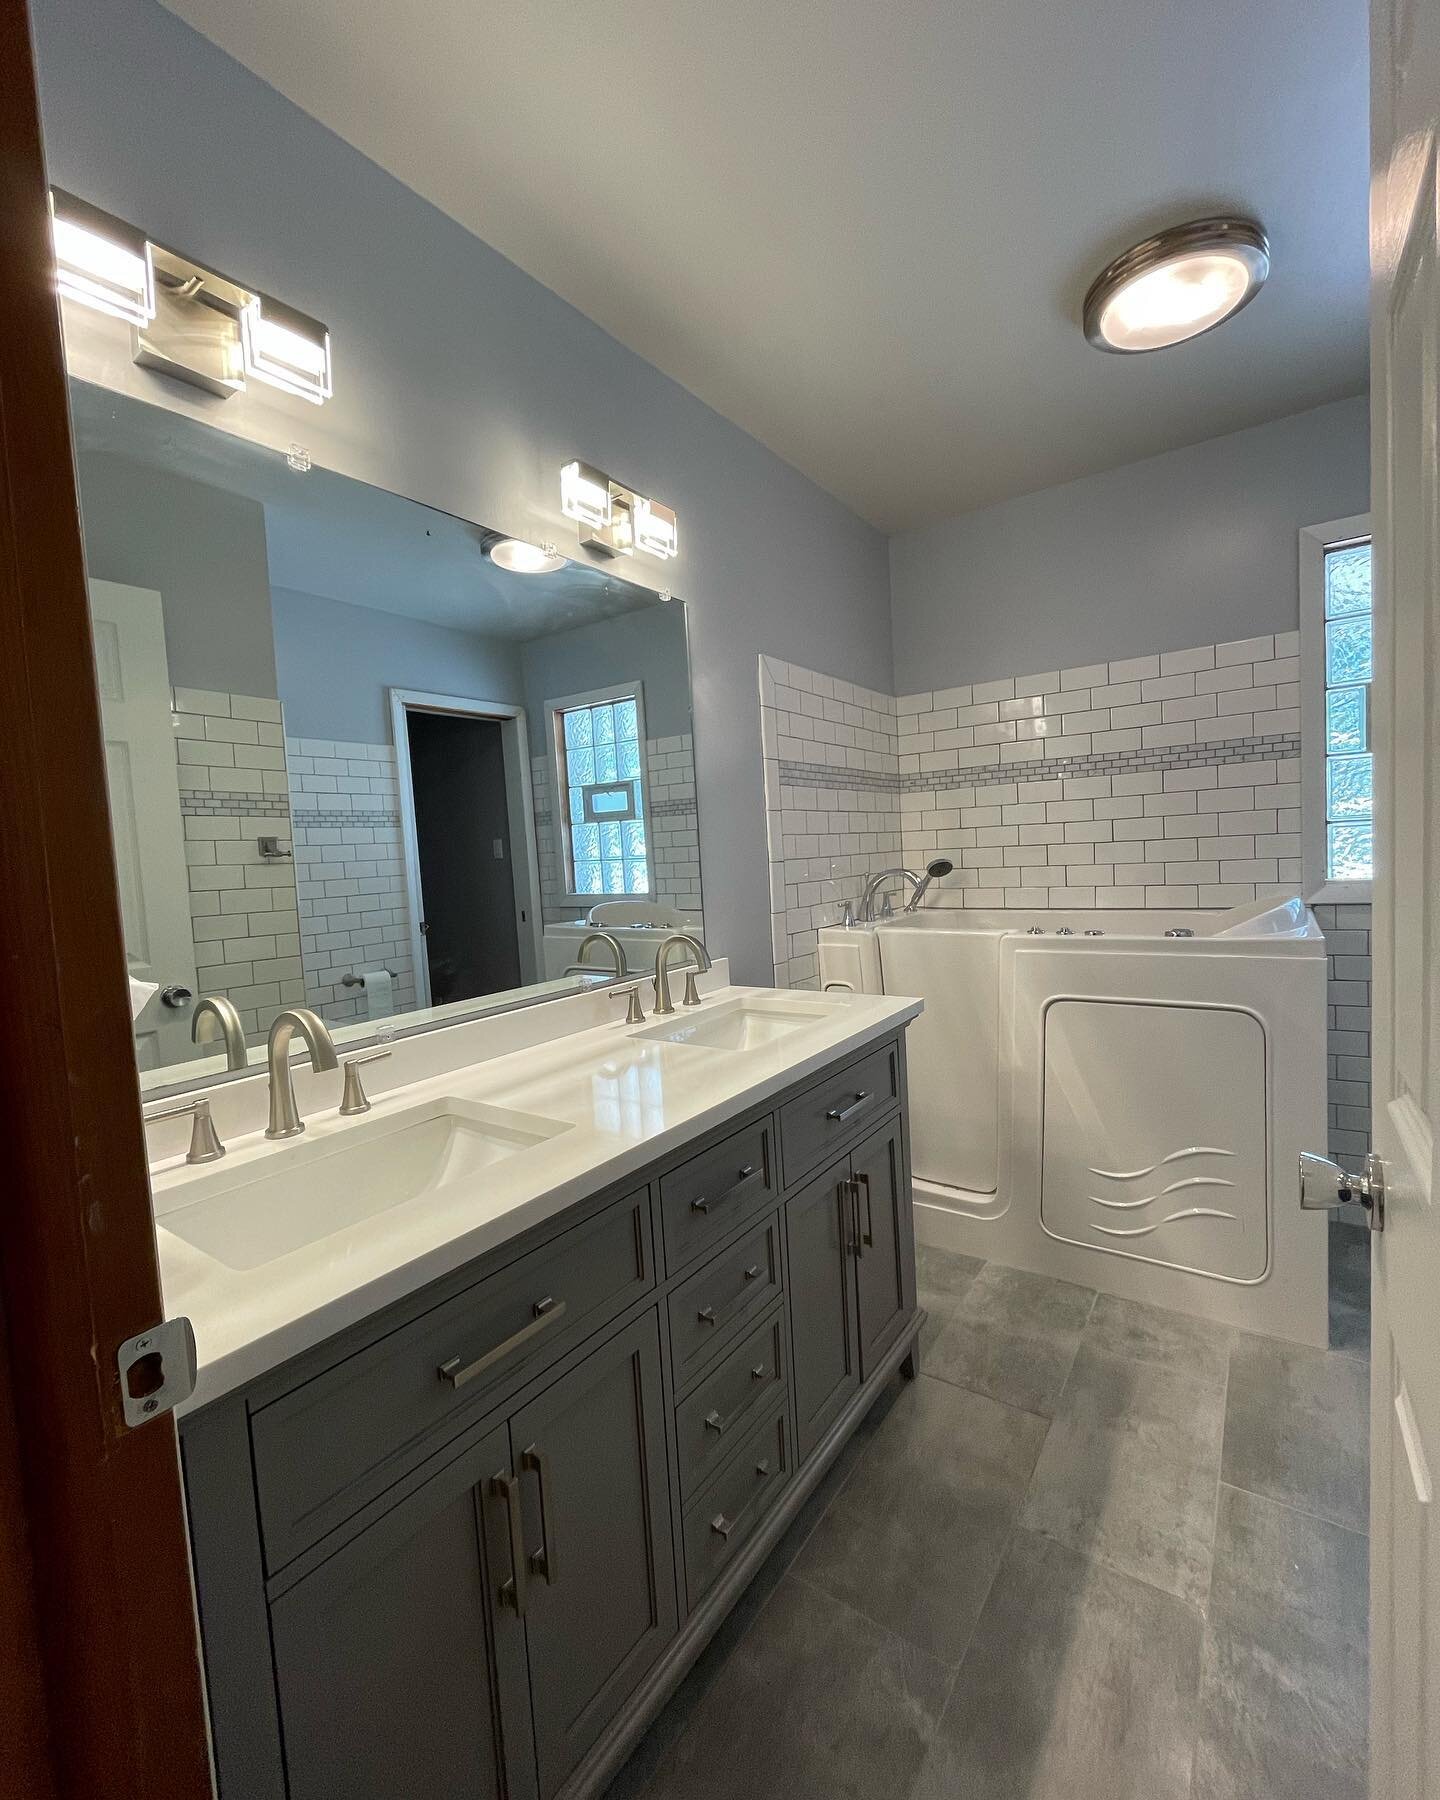 Start your new year with your dream bathroom!🔨🔧 
Call 219-433-4846

#diy #diyhomedecor #lakecountyindiana #remodeling #renovationproject #kitchen #interiordesign #homedecor #mykitchen #houseflipping #interior #architecture #painting #countertops #d